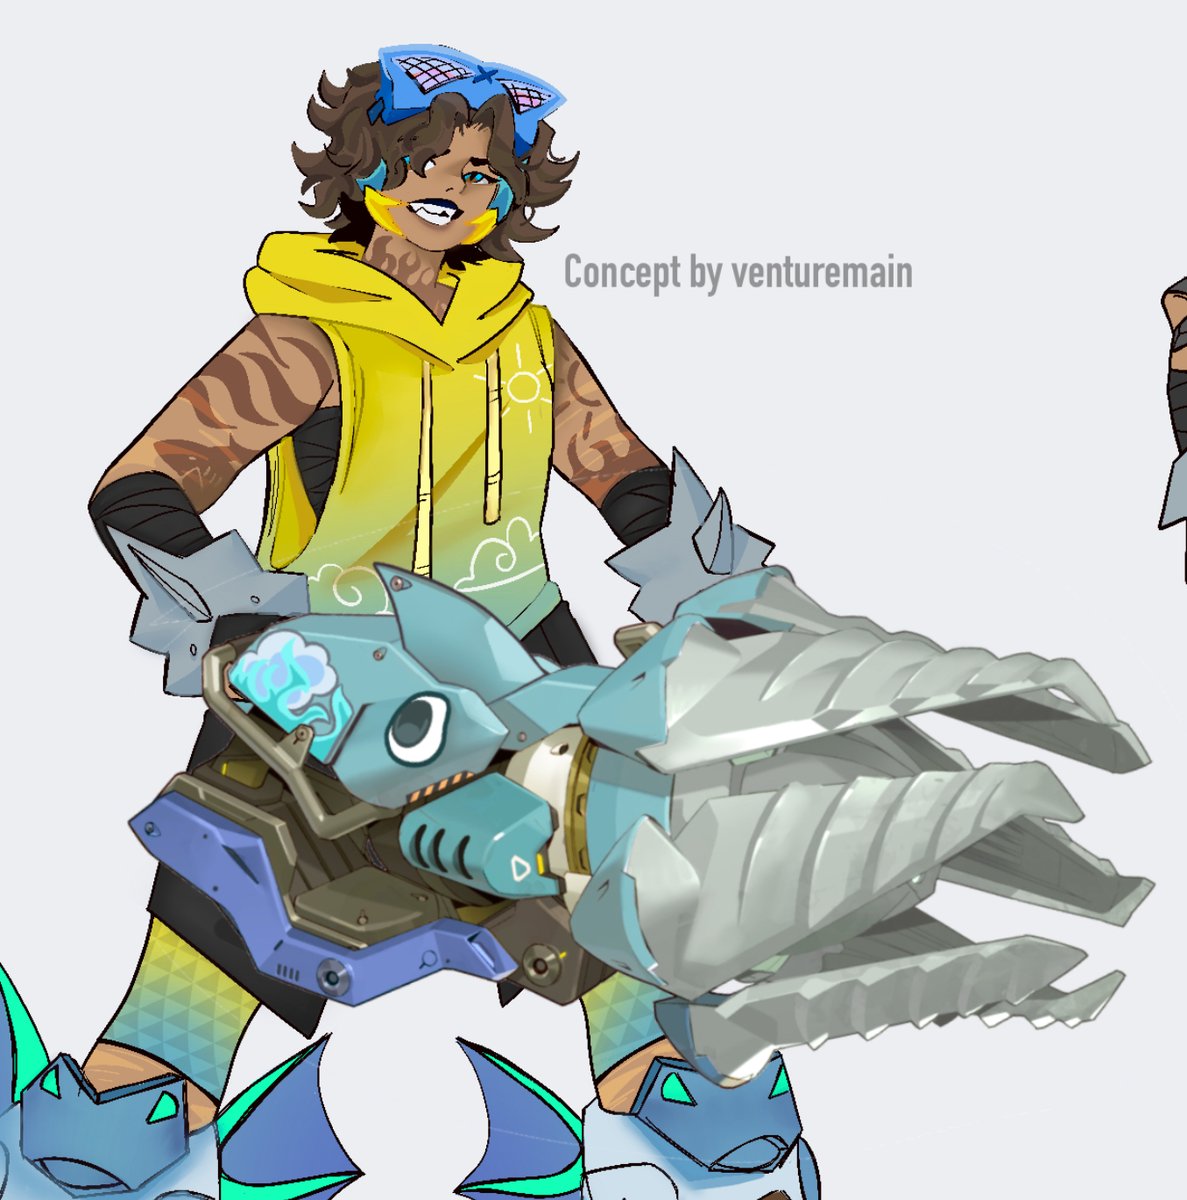 Shark venture skin concept! Took me a day 2nd slide is a close up on icon and spray #venture #ventureow2 #venturefanart #ow2concept #owconcept #Ventureoverwatch #ventureoverwatch2